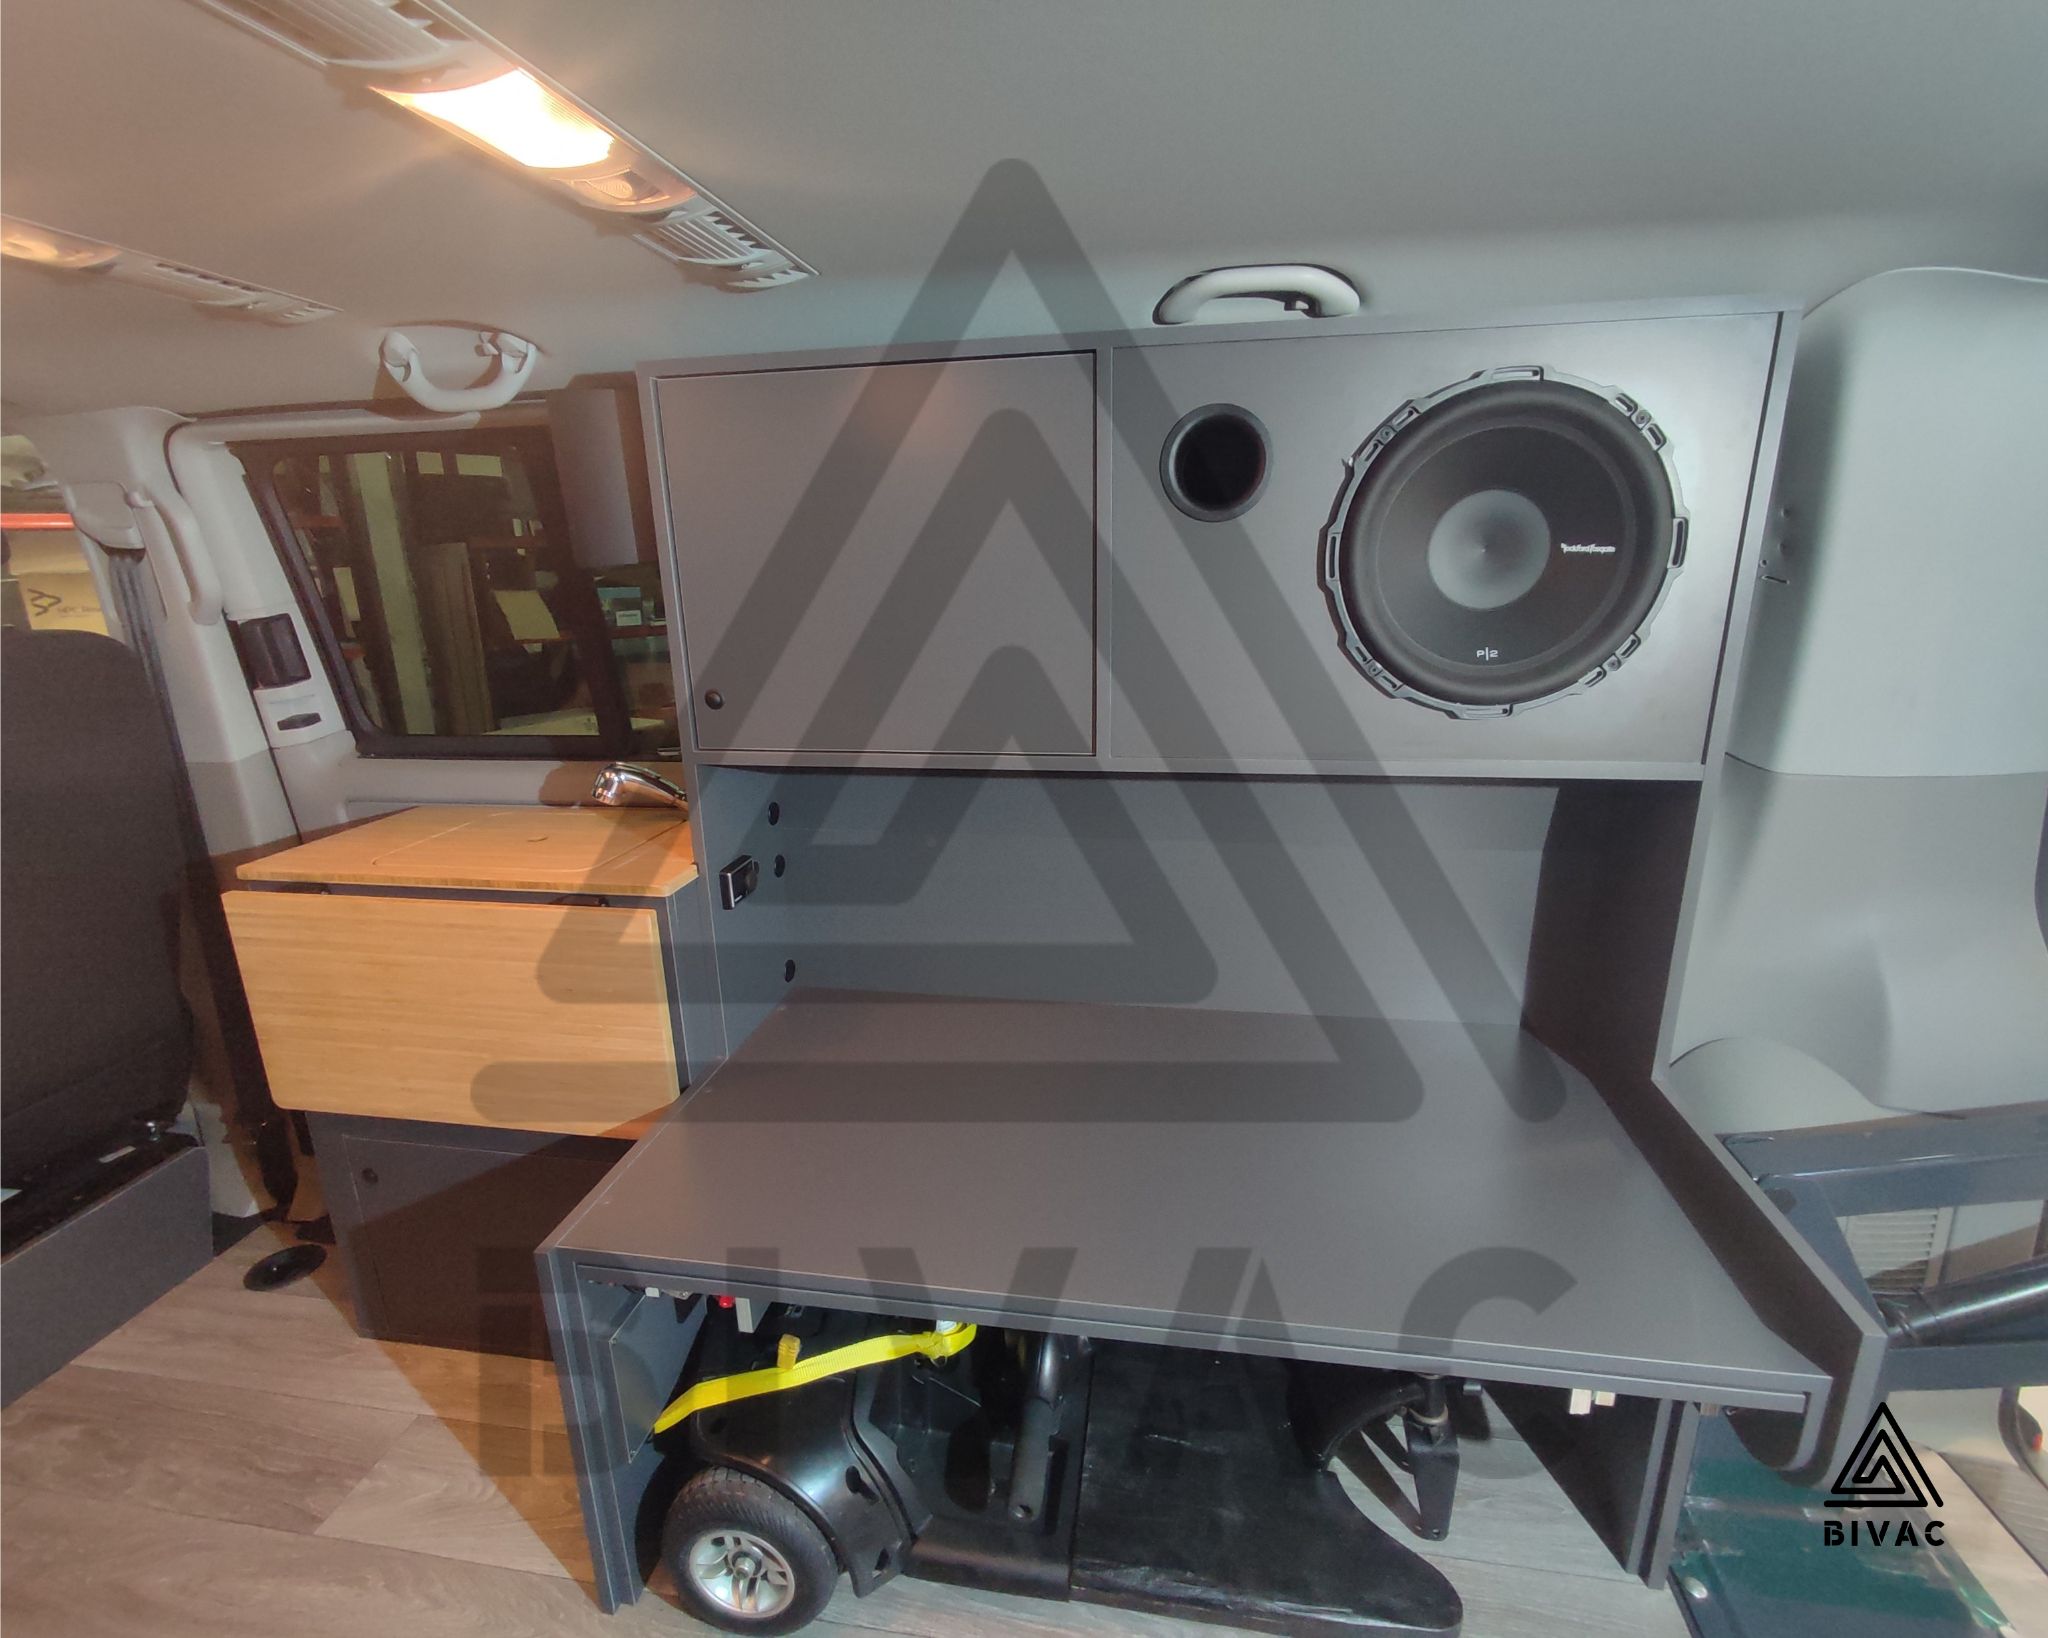 VW CARAVELLE MUEBLE COMPLETO